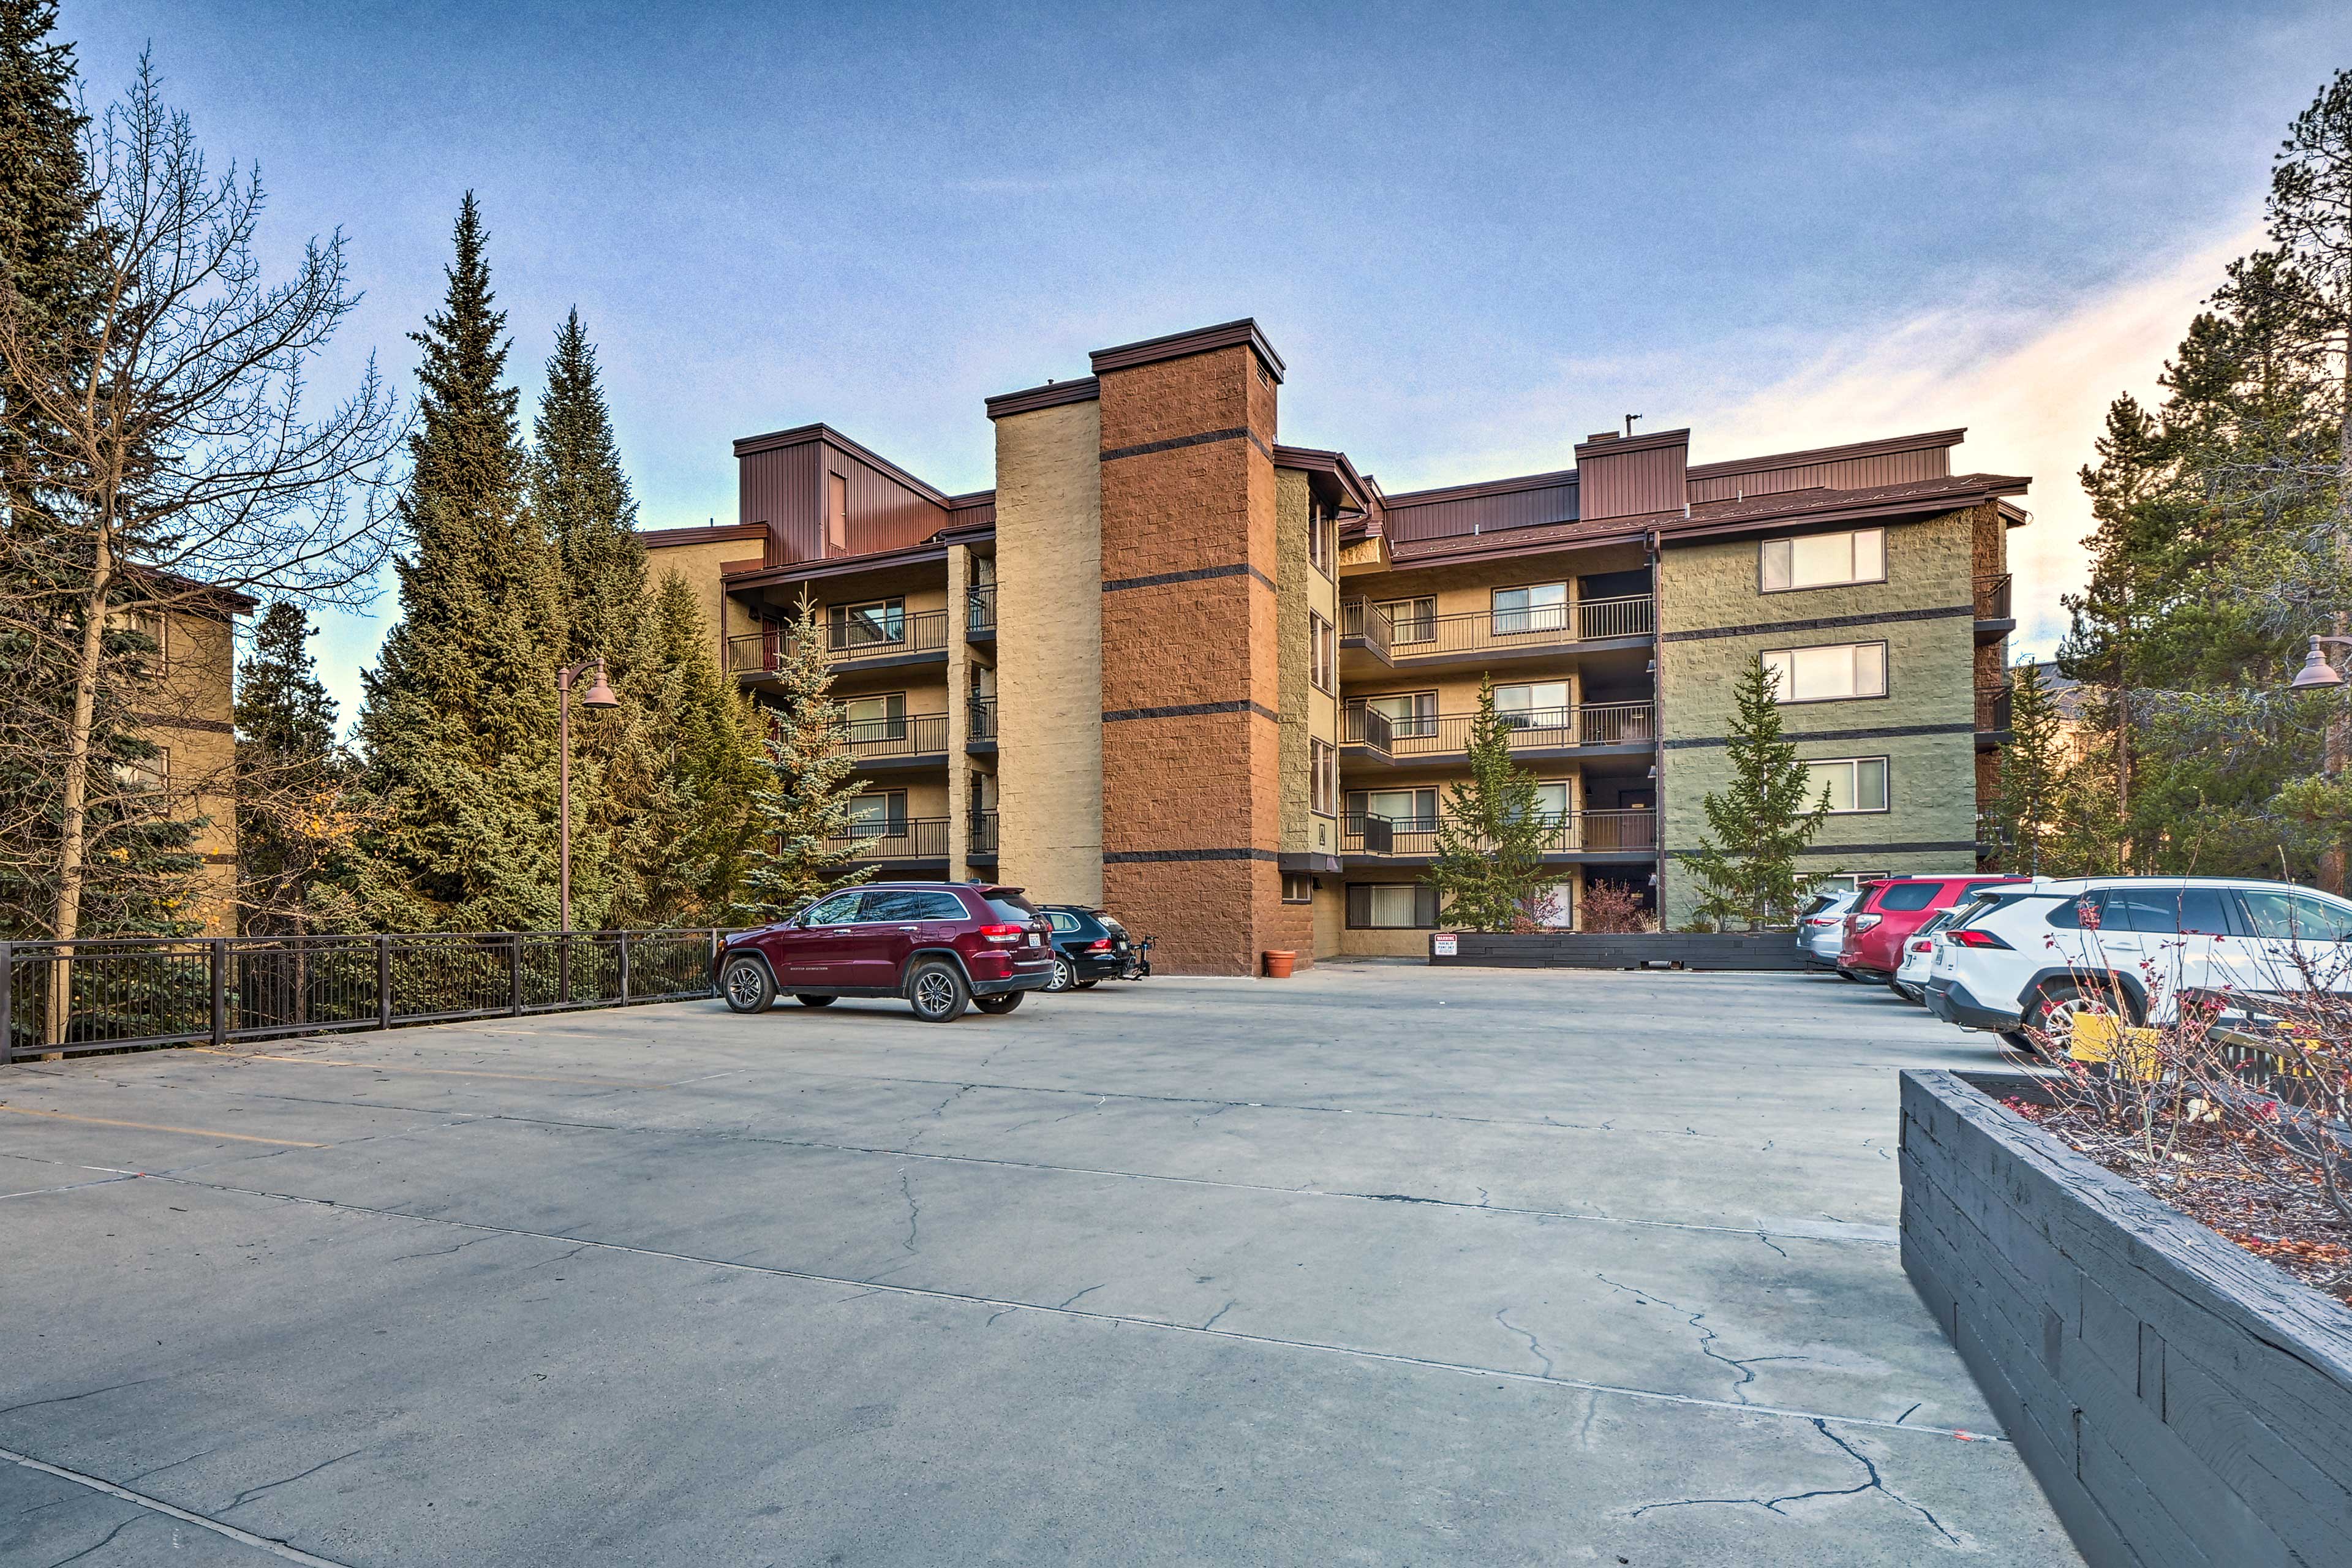 Condo Community | Reserved Space in Parking Lot (1 Vehicle)